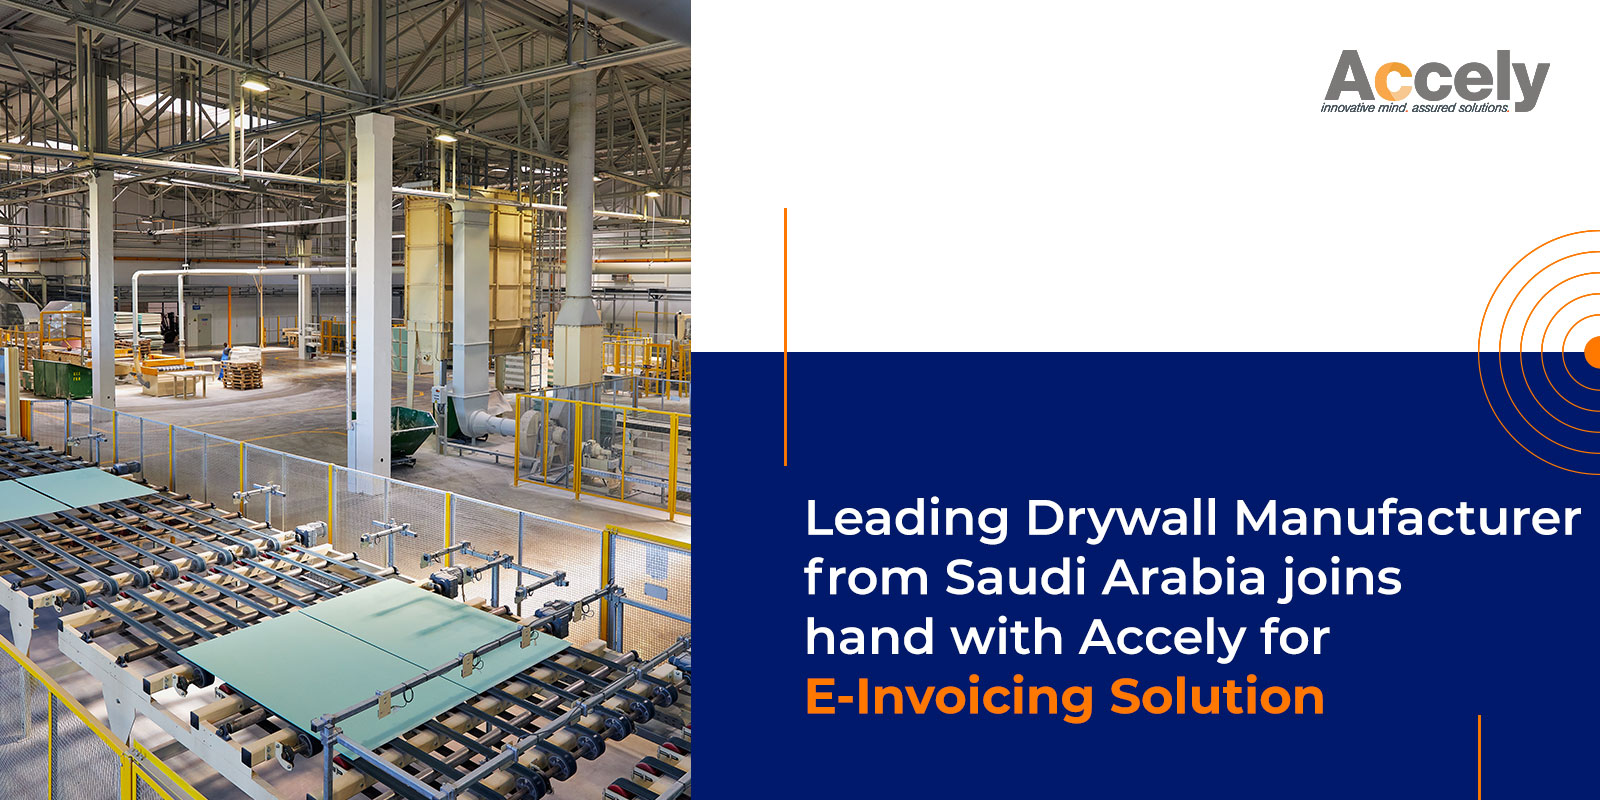 Leading Drywall Manufacturer from Saudi Arabia joins hand with Accely for E-Invoicing Solution